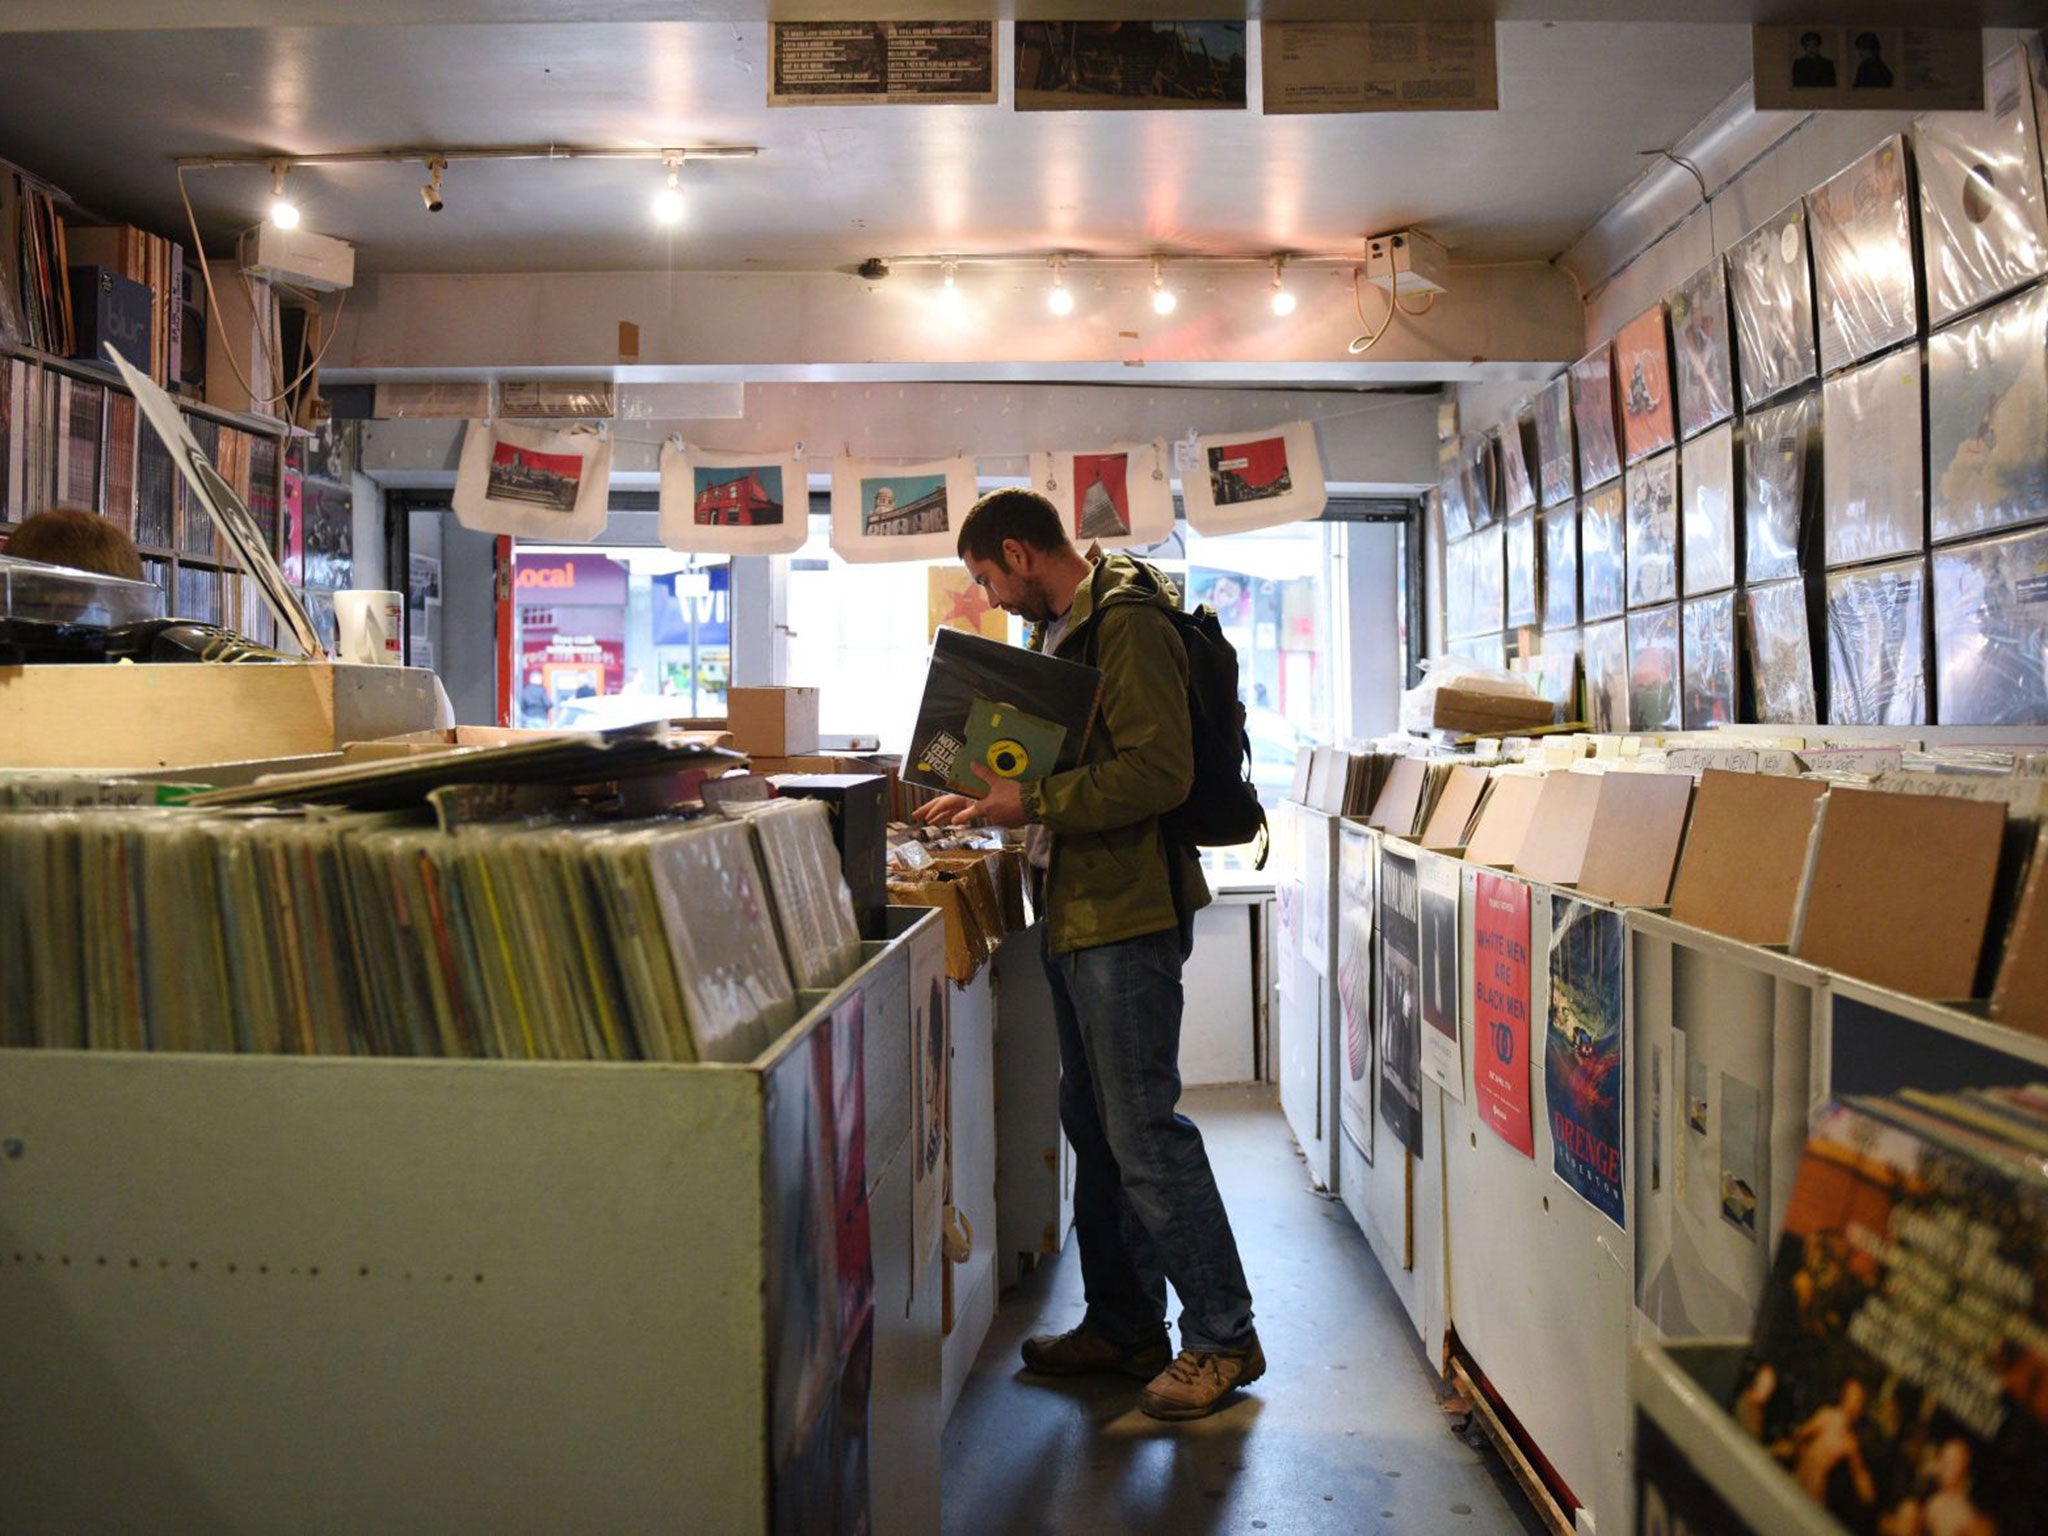 Vinyl album sales continue to surge, up 50% in 2015, despite the rise of streaming